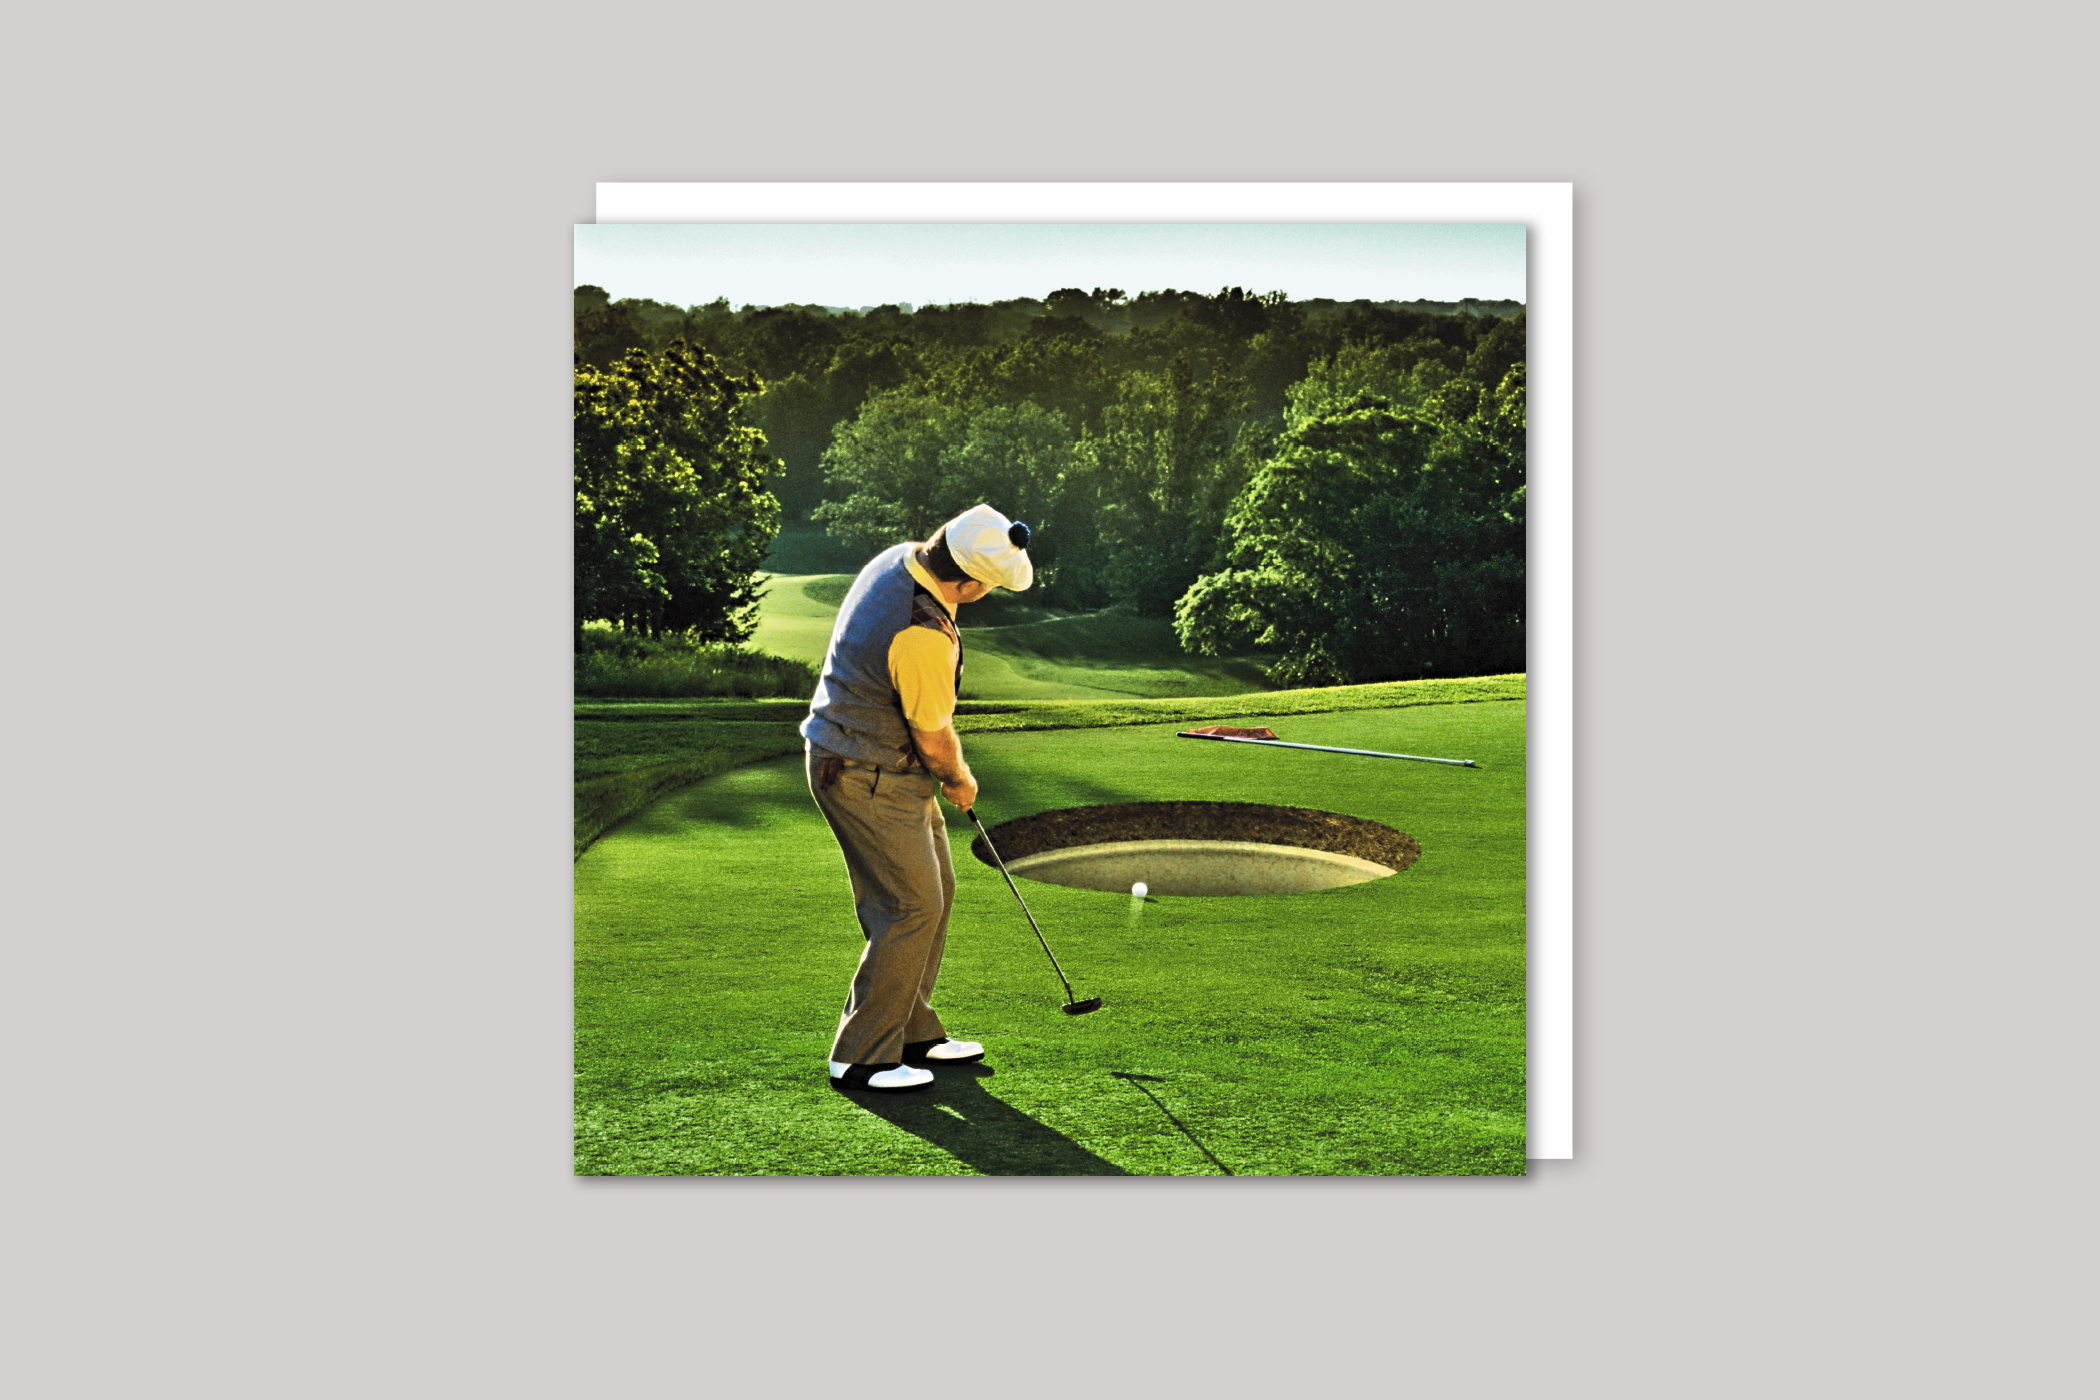 Fantasy Golf from Exposure range of photographic cards by Icon, back page.